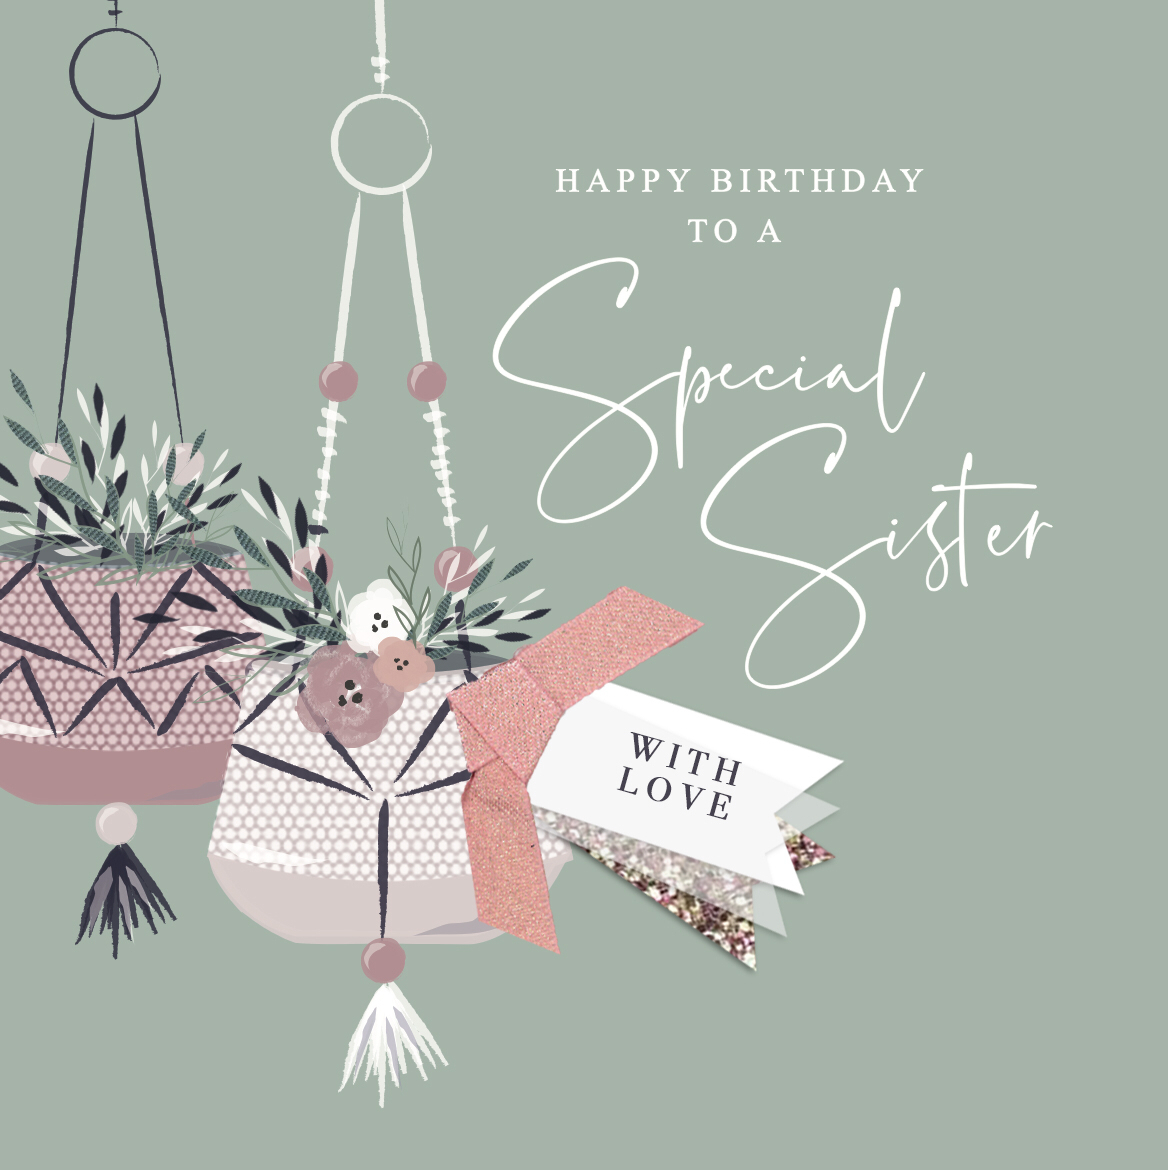 The Handcrafted Card Company Special Sister Planter Birthday Card